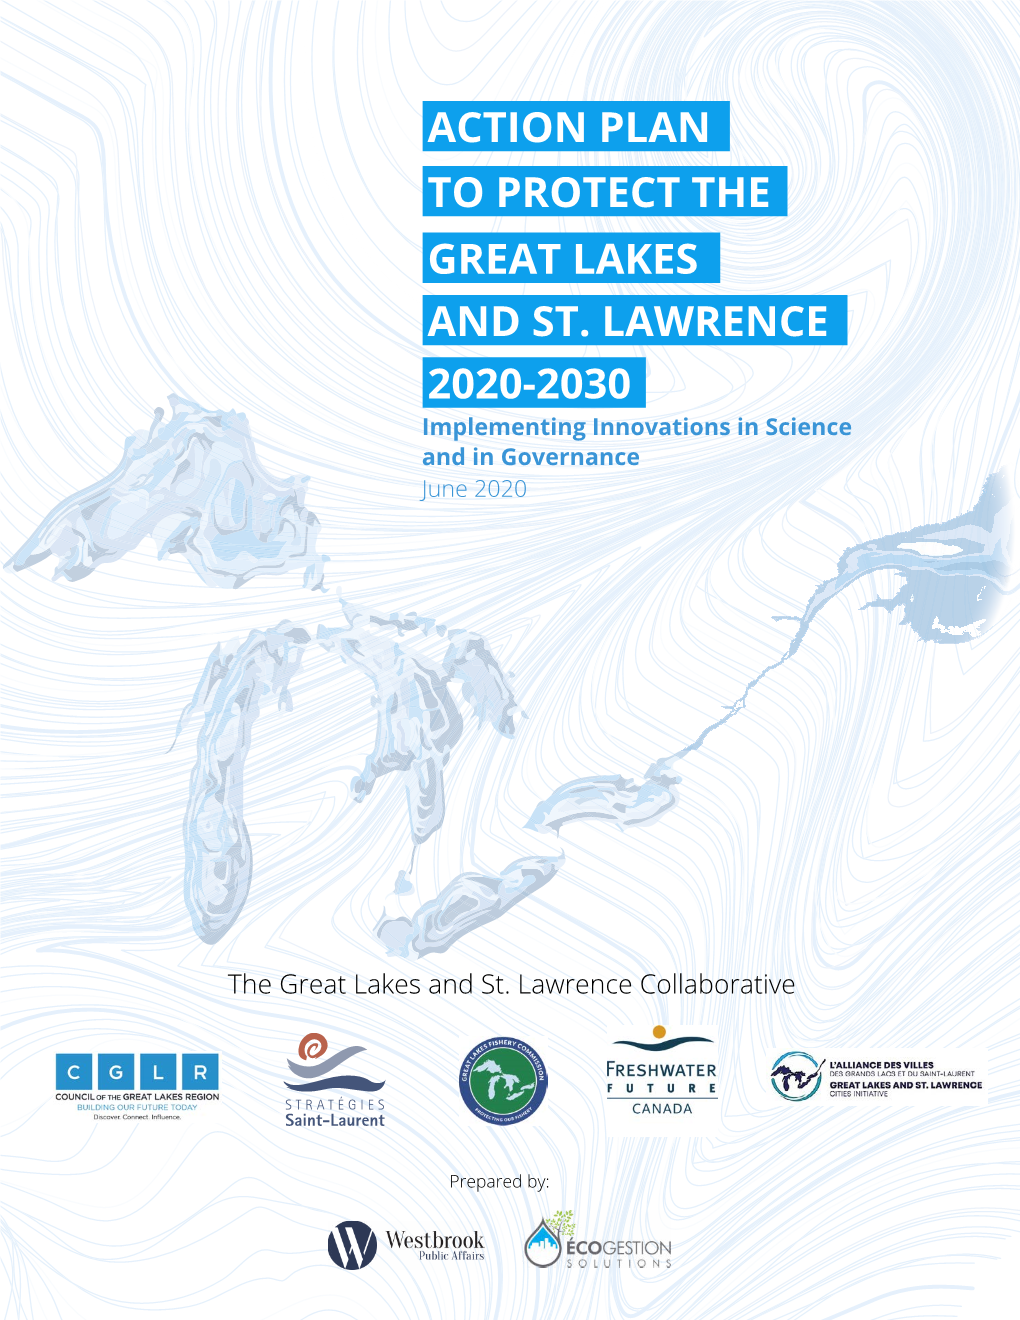 Action Plan to Protect the Great Lakes and St